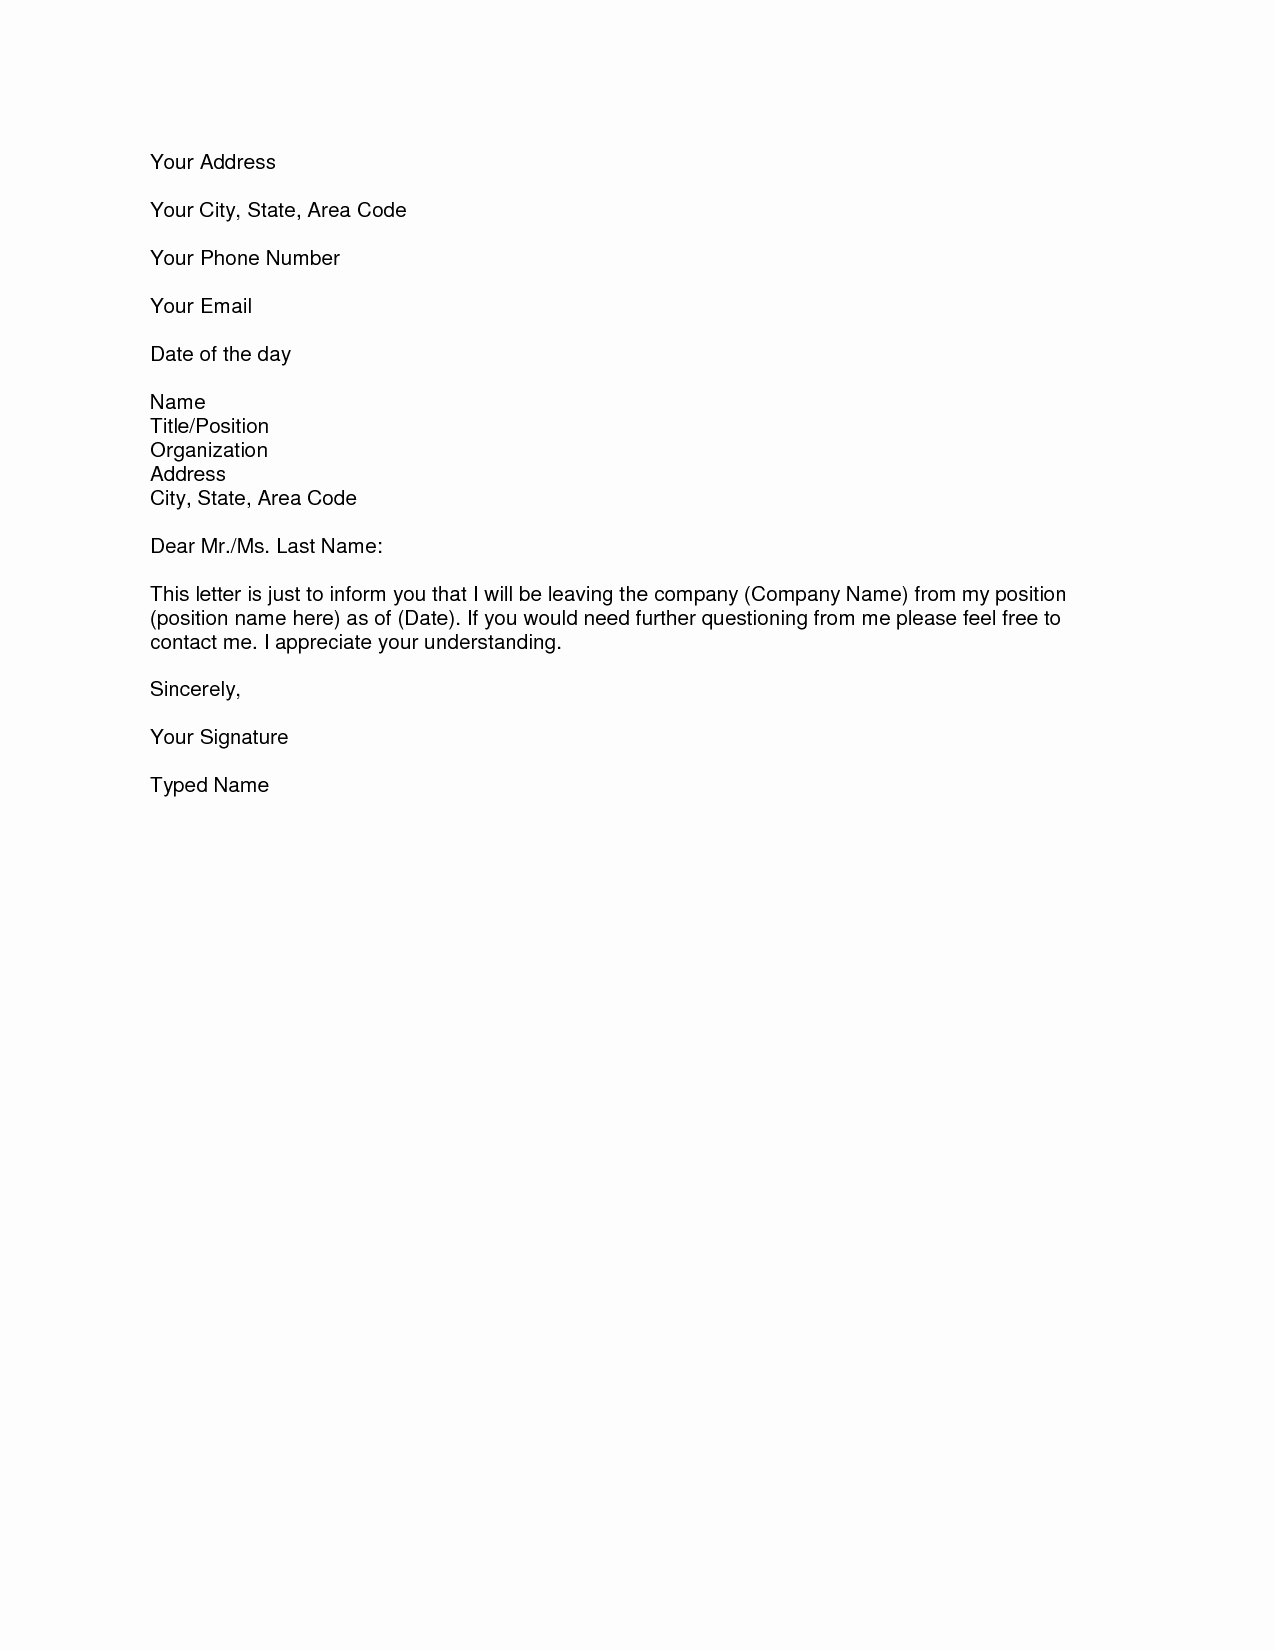 Microsoft Word Business Letter Templates Luxury Microsoft Word Resignation Letter Template Simple